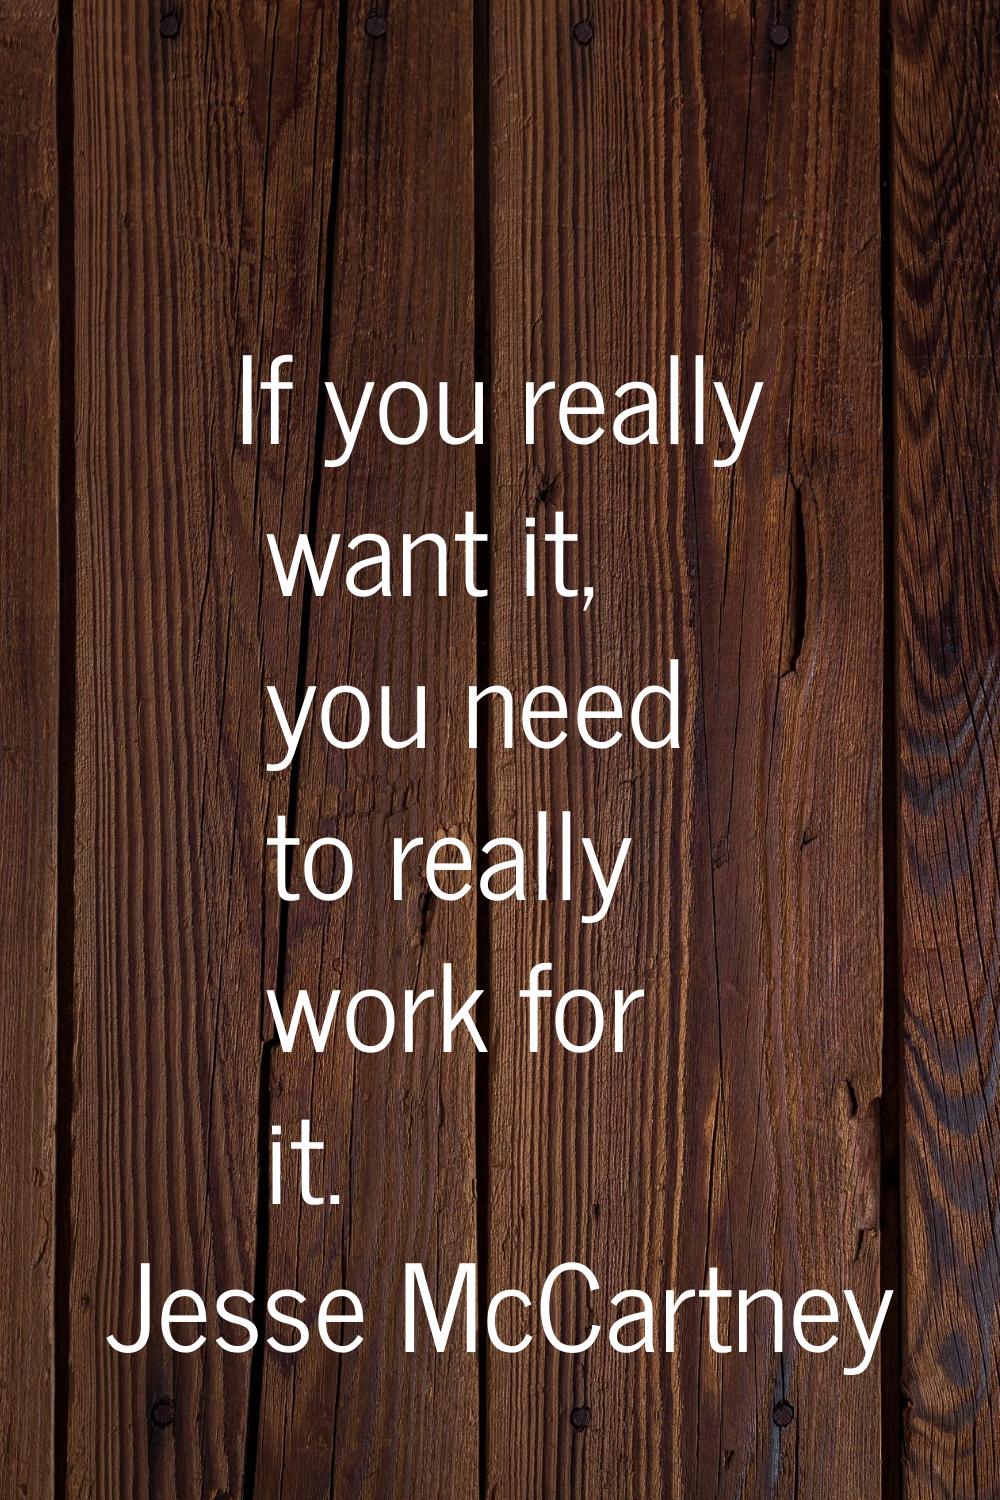 If you really want it, you need to really work for it.